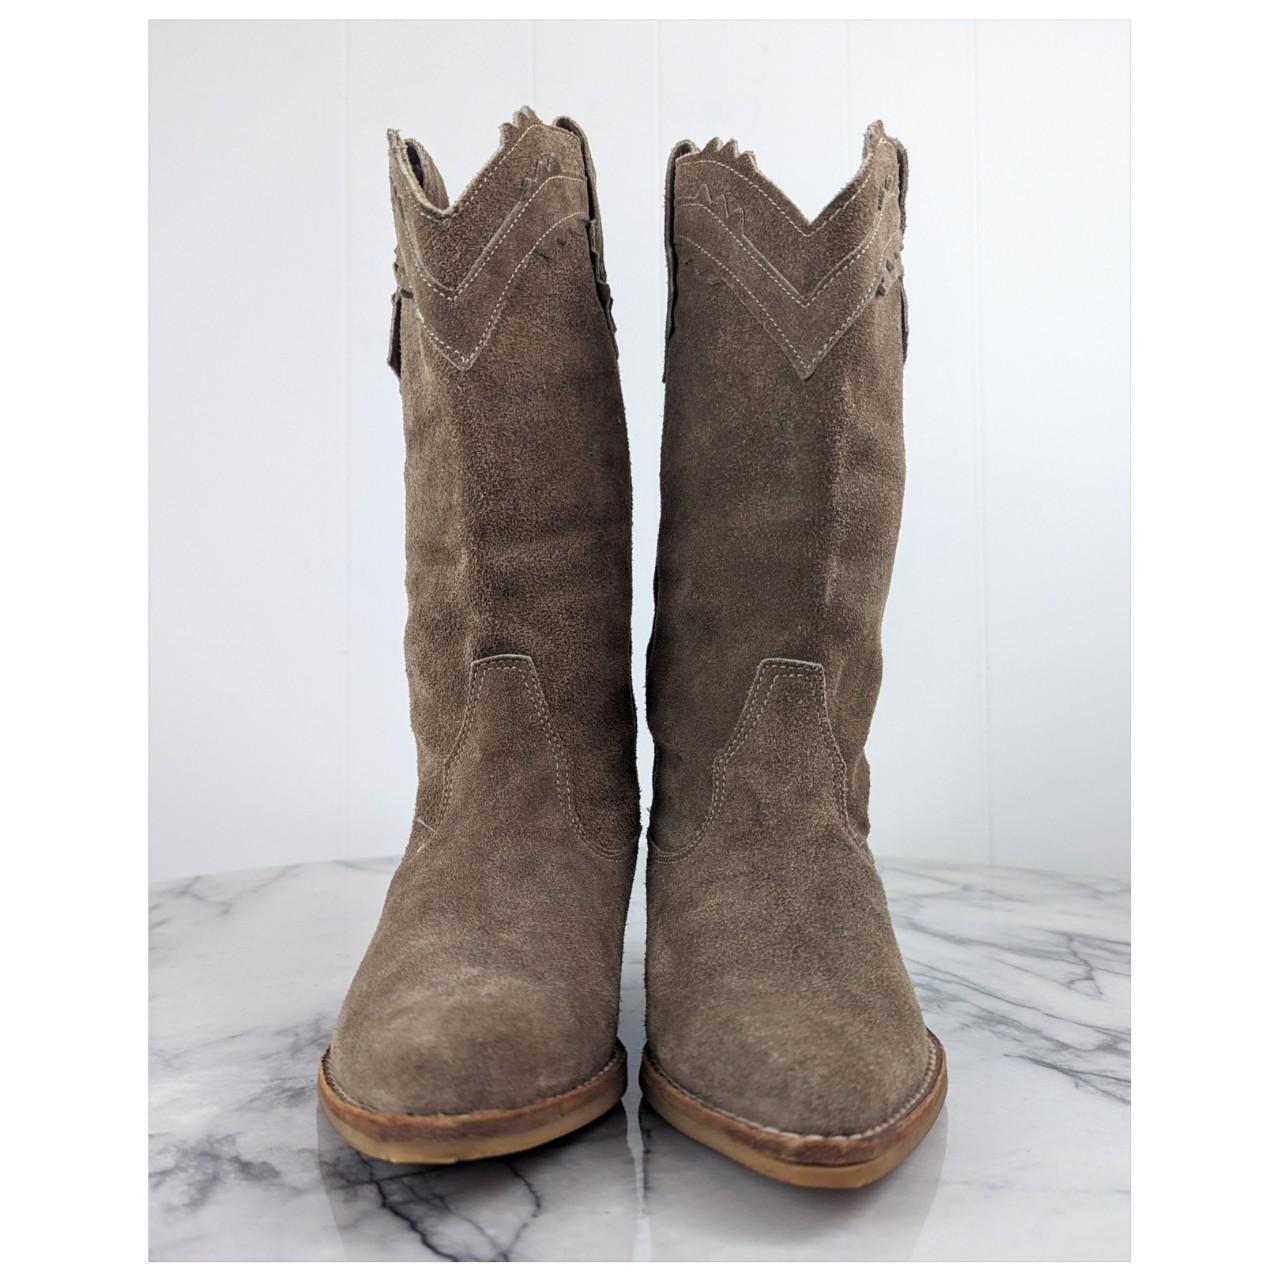 Frye Women's Tan and Grey Boots (2)